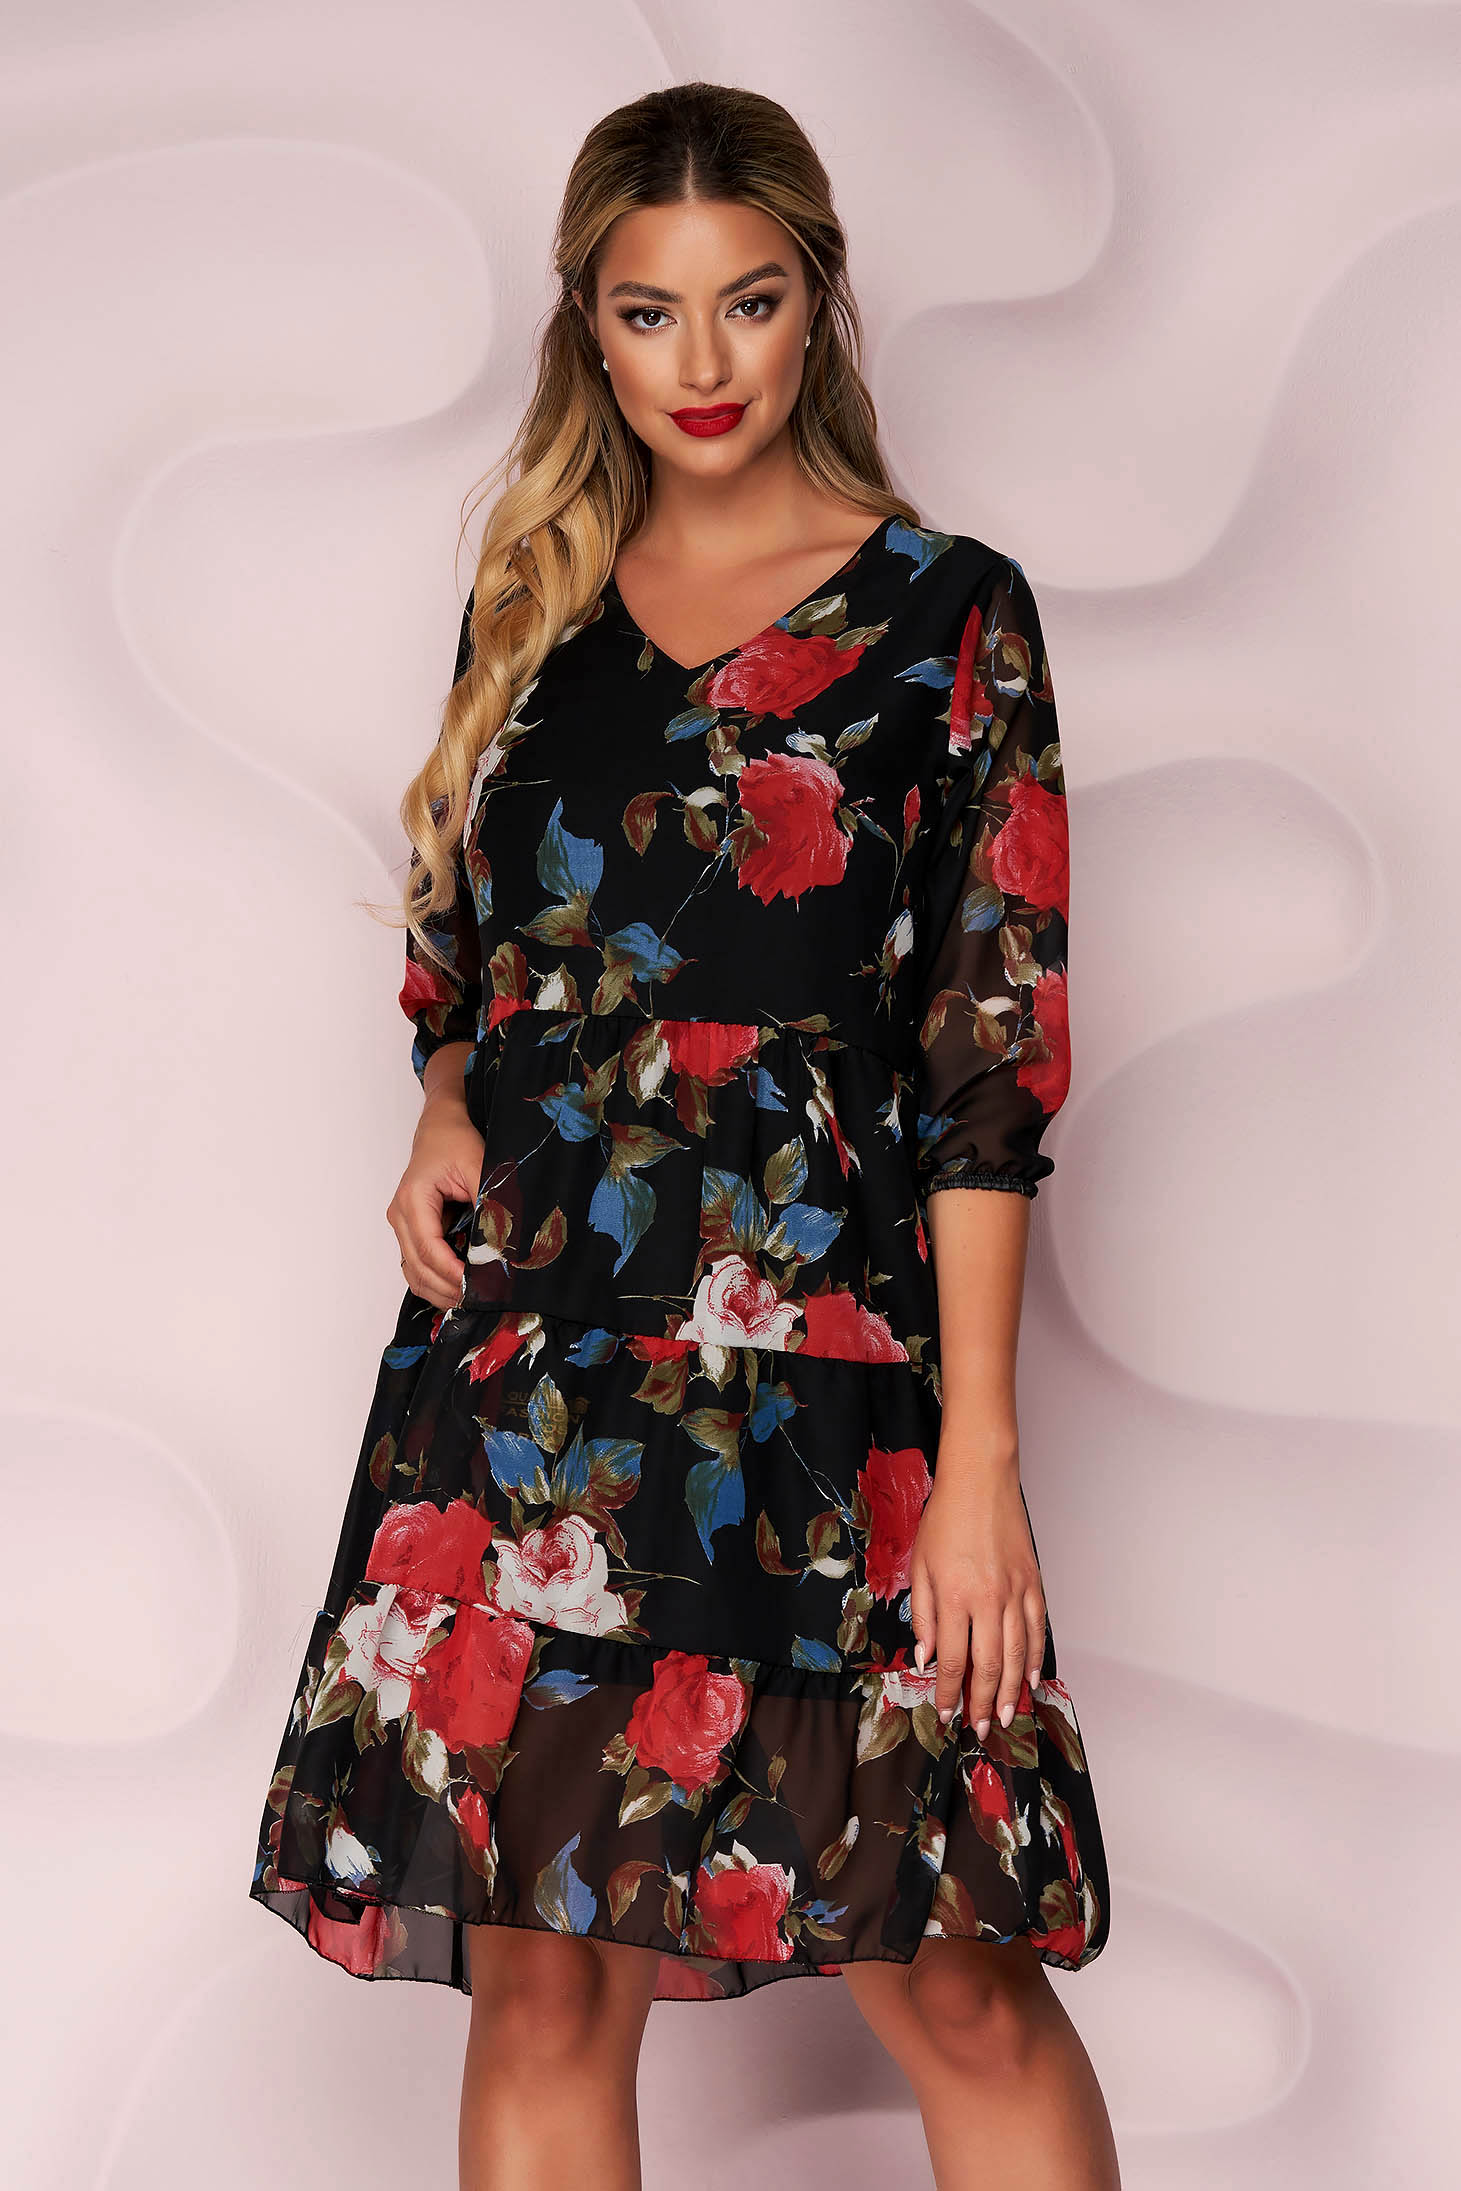 From veil fabric loose fit with ruffle details with 3/4 sleeves dress